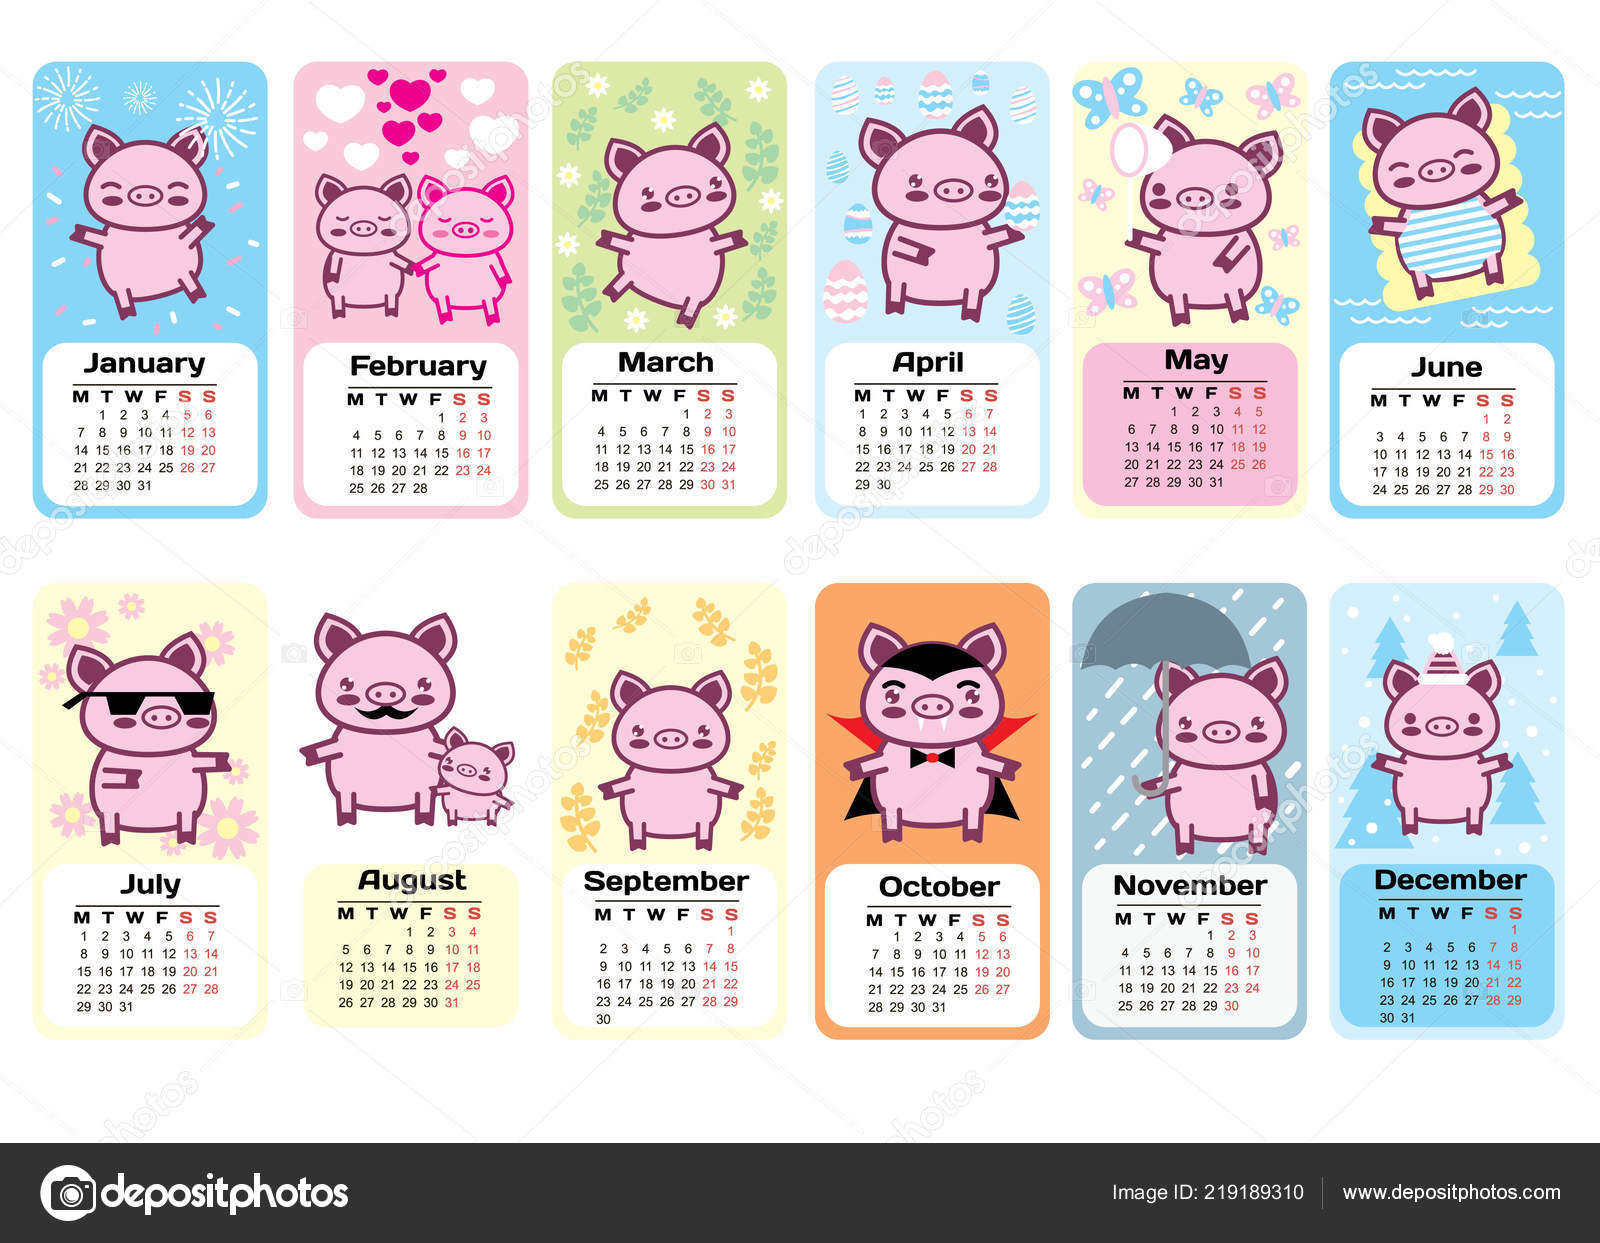 Calendar 19 Pig The Symbol Of 19 Kawaii Cute Pig And Holidays Of The Year Stock Vector Image By C Dergriza